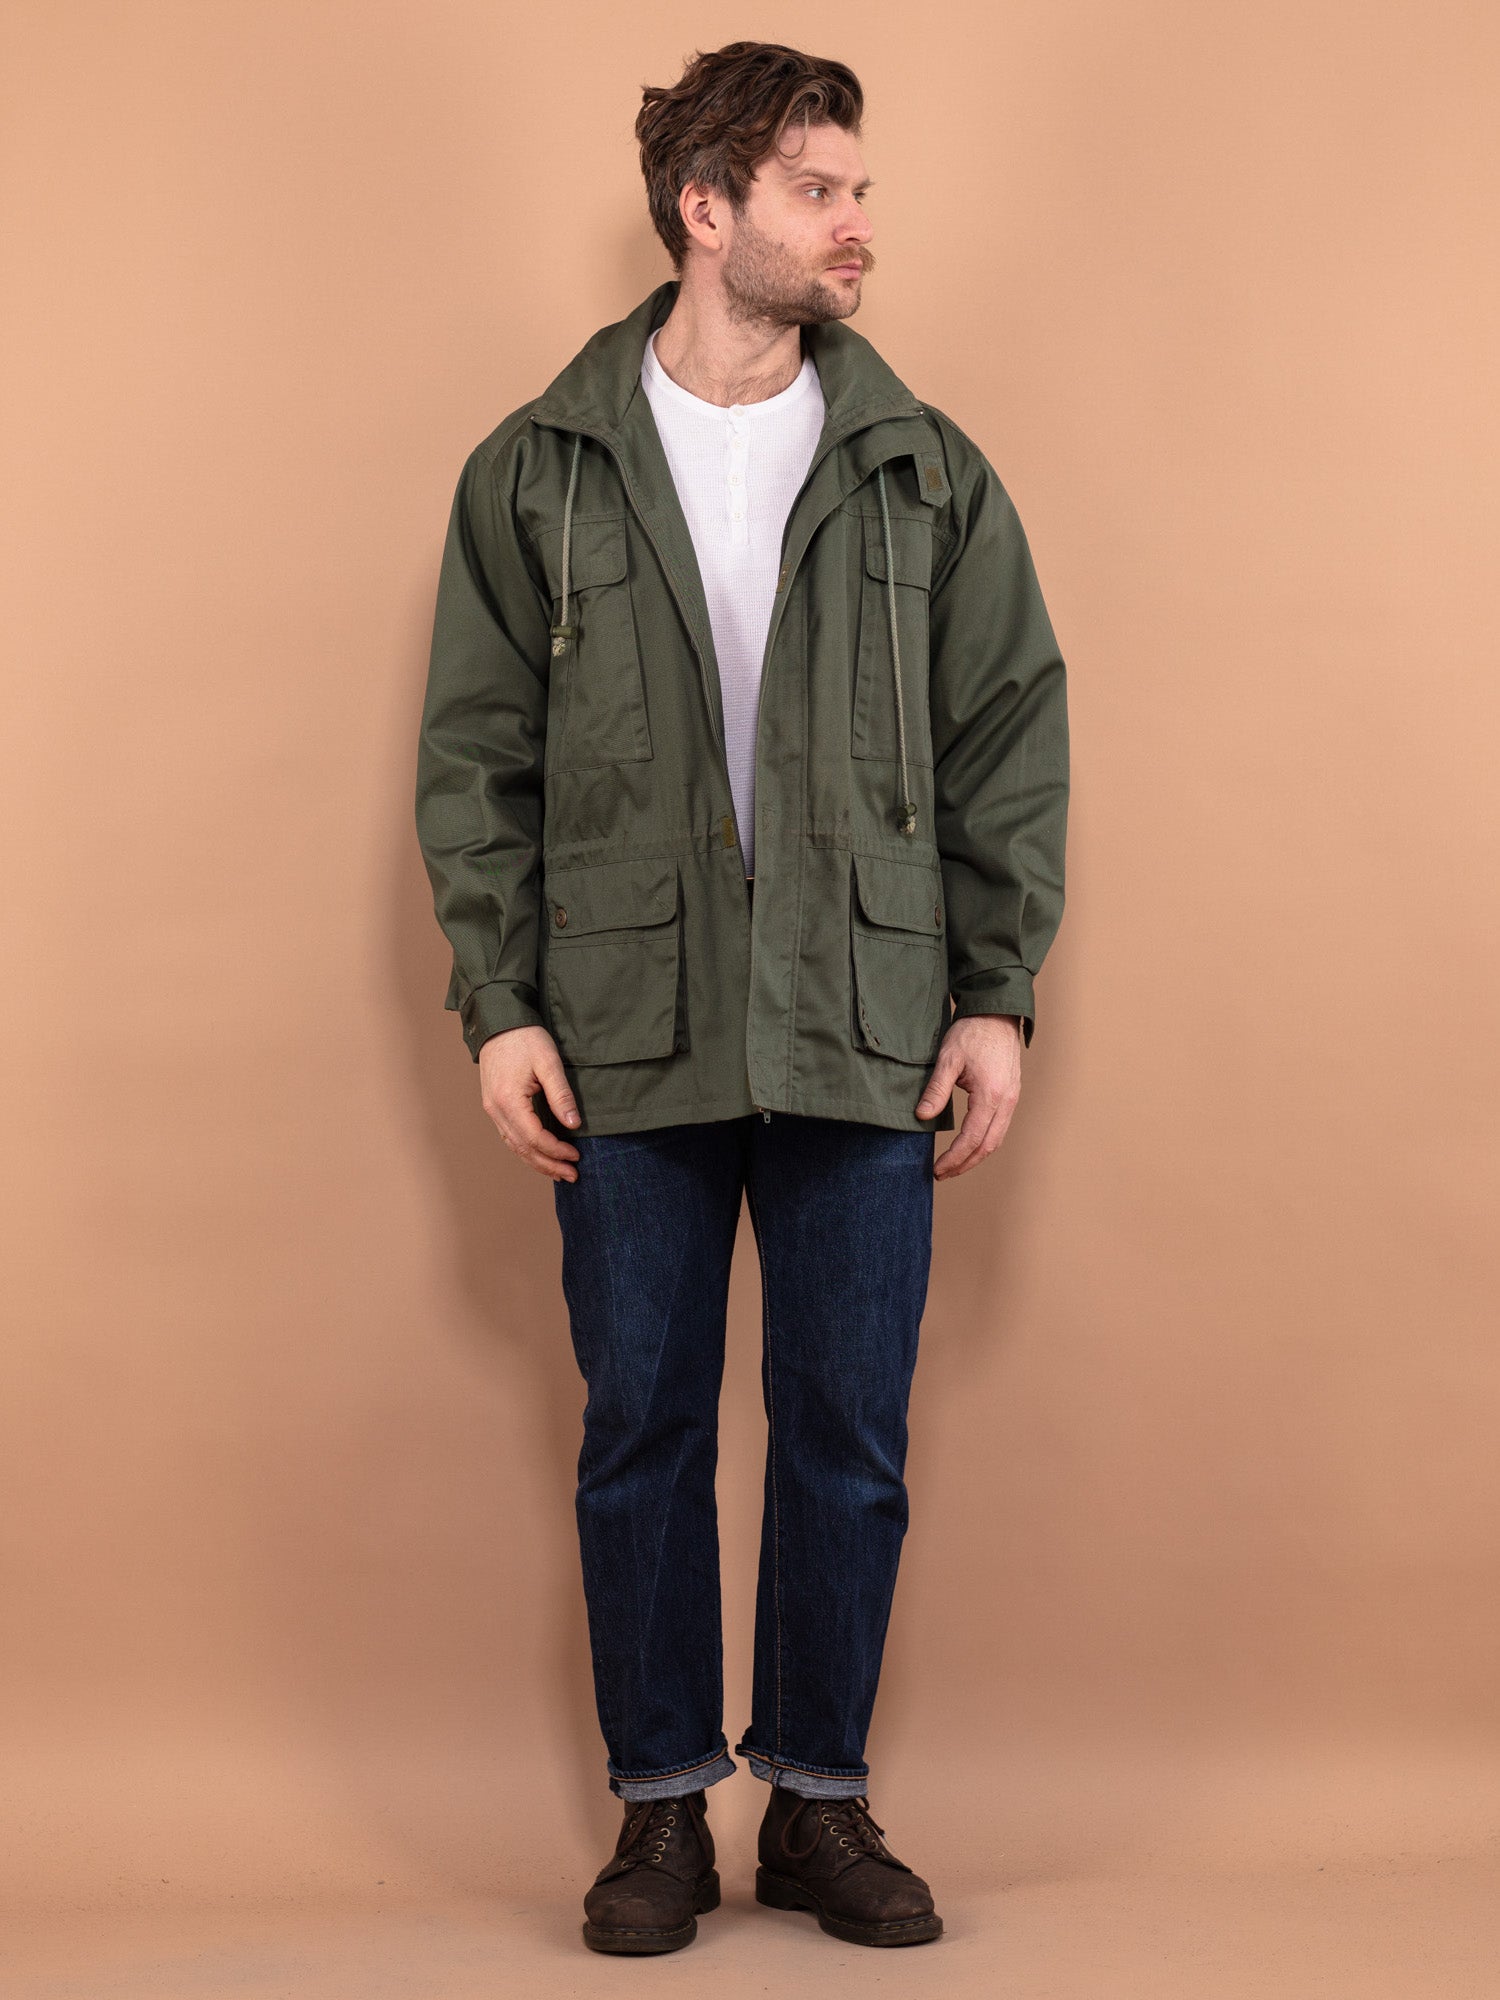 Online Vintage Store | 90's Military Style Cargo Jacket | Northern Grip –  NorthernGrip